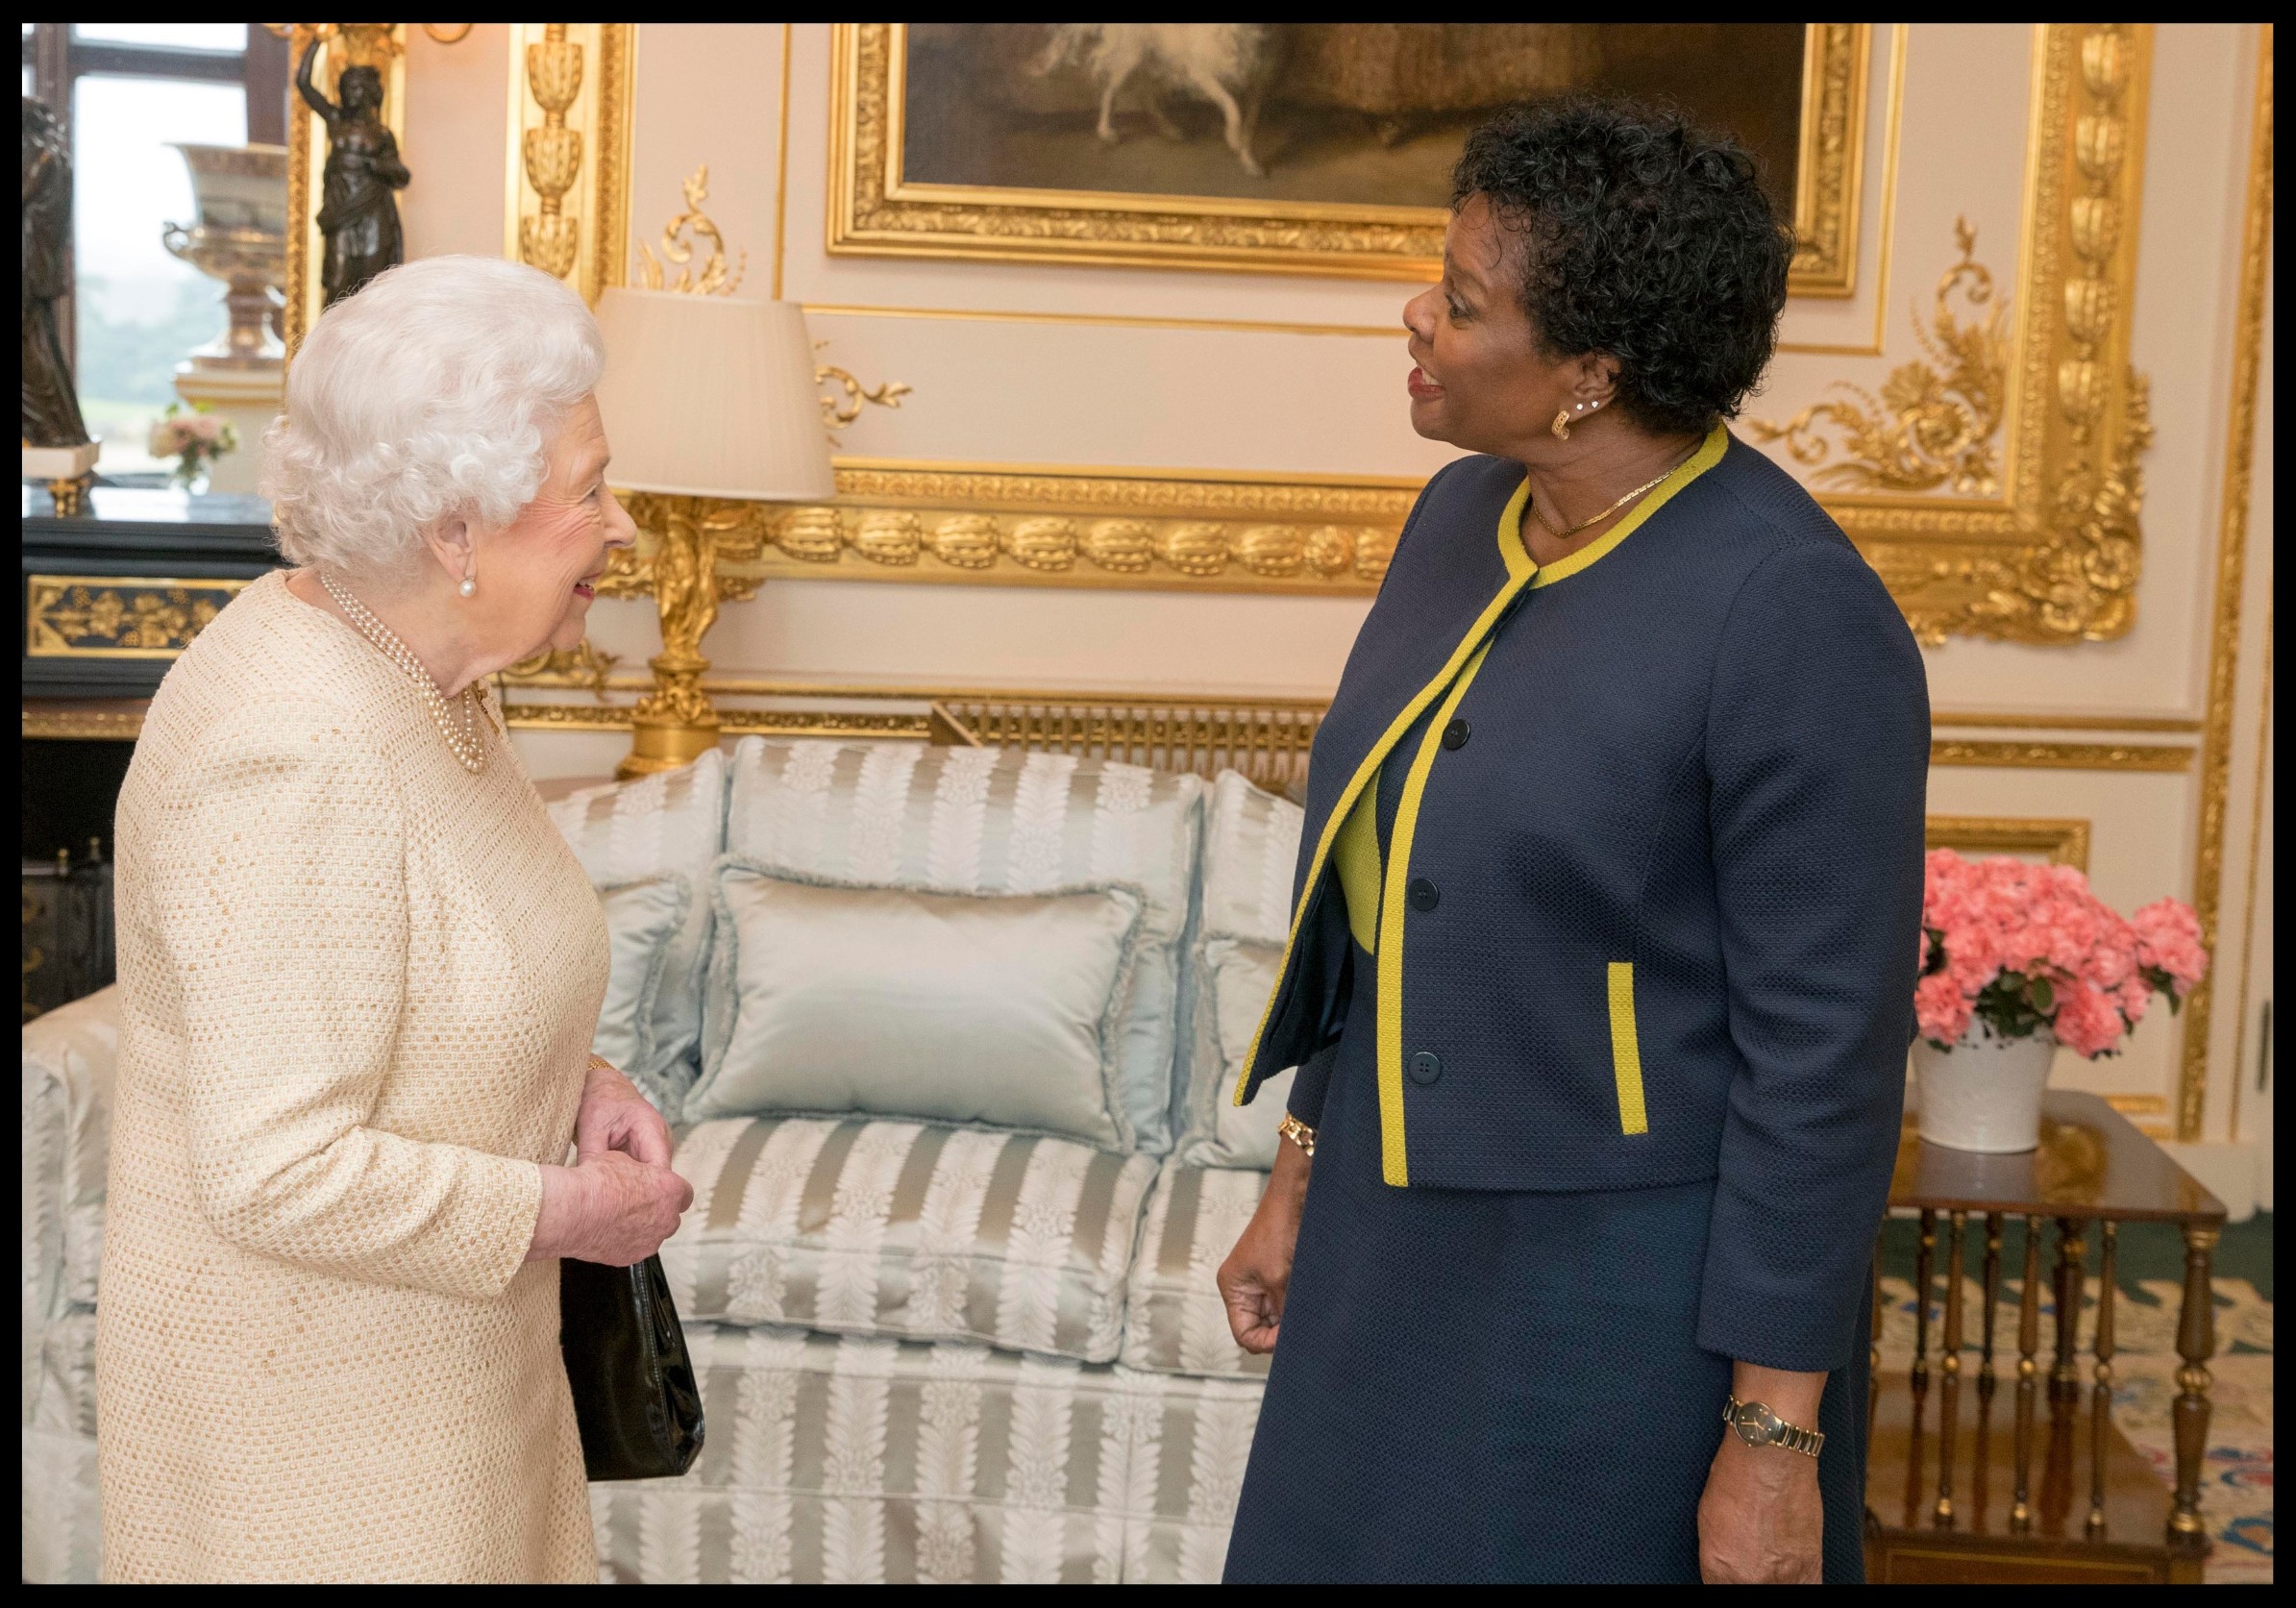 March 28, 2018 - Windsor, Windsor, United Kingdom - Audiences at Buckingham Palace. Queen Elizabeth II receives Governor-General of Barbados Dame Sandra Mason during a audience at Windsor Castle, Berkshire.,Image: 367203933, License: Rights-managed, Restrictions: * China, France, Italy, Spain, Taiwan and UK Rights OUT *, Model Release: no, Credit line: I-Images / Zuma Press / Profimedia